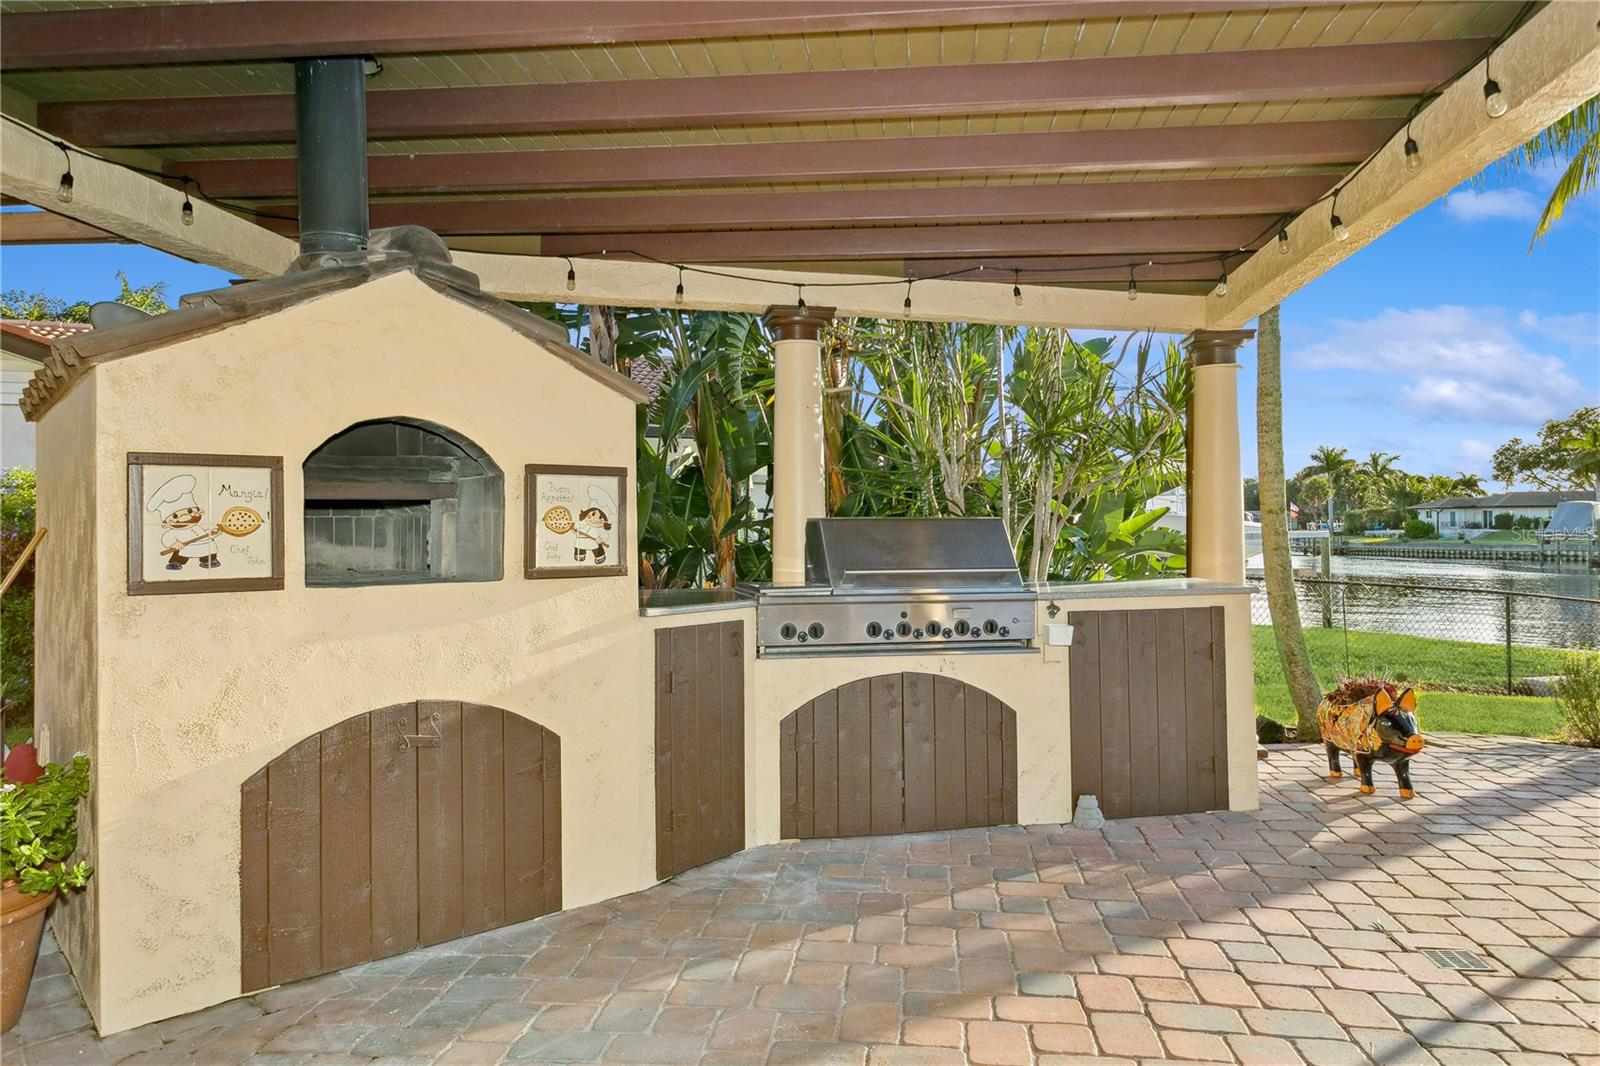 Working pizza oven and outdoor kitchen